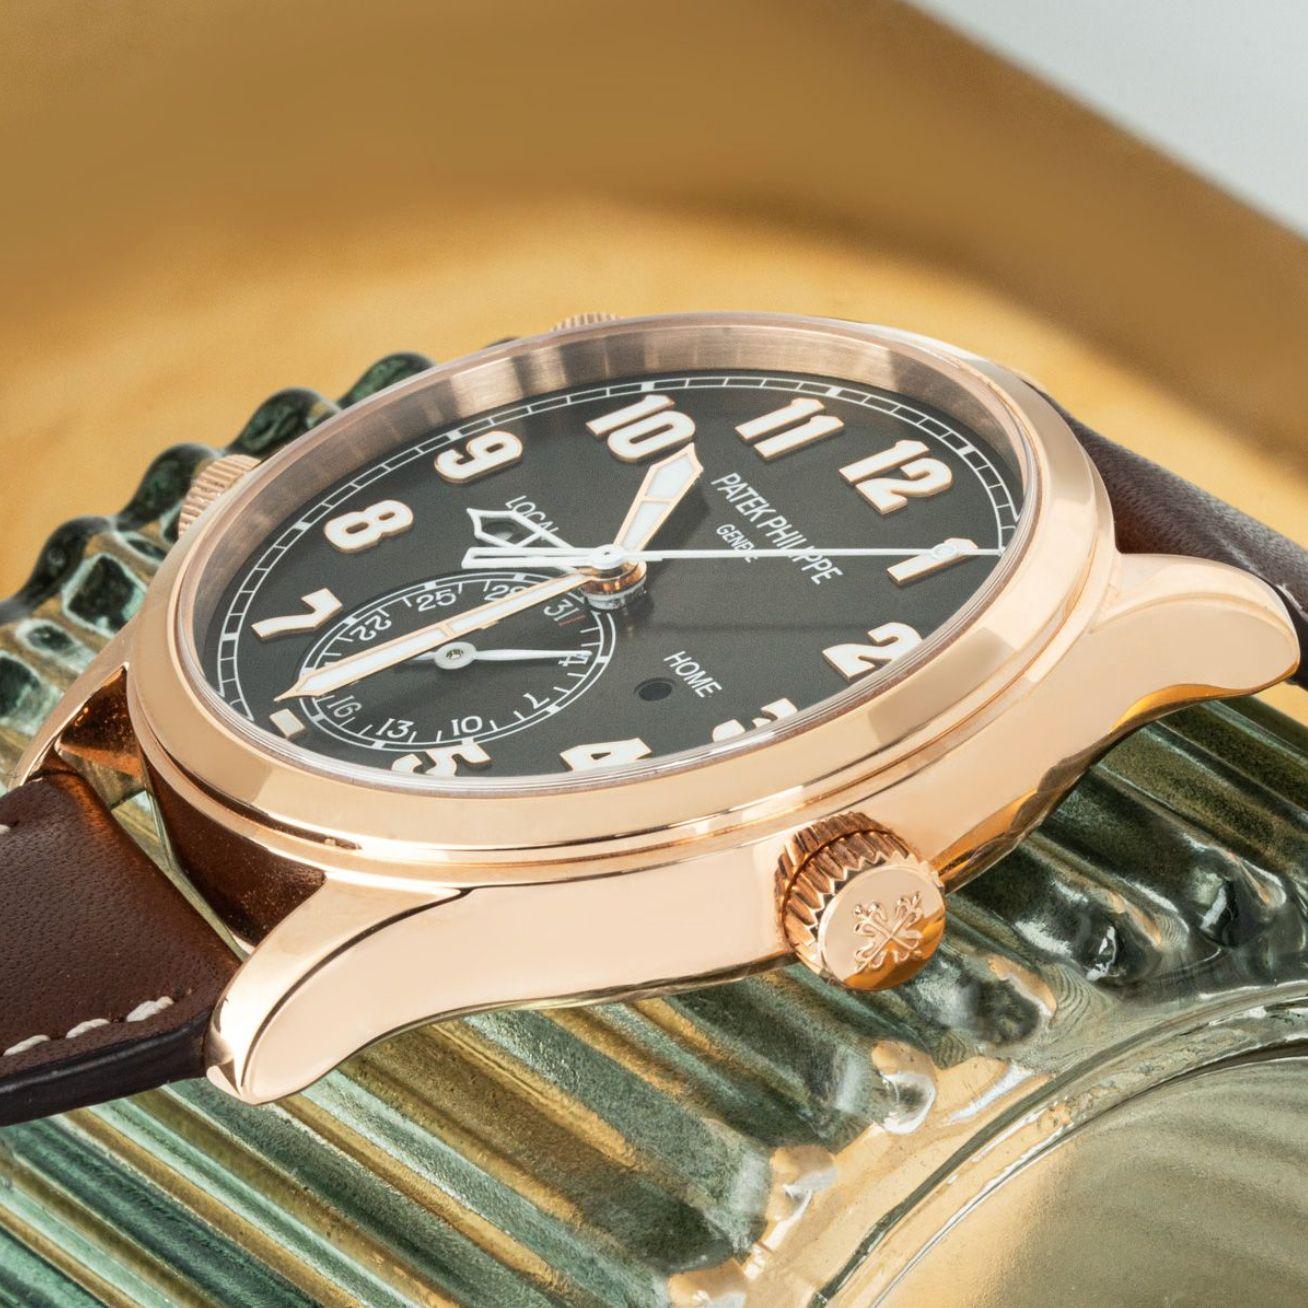 A Complications Calatrava Pilot Travel Time, crafted in rose gold by Patek Philippe. Features a brown sunburst black gradated dial with a second-time zone hand, day/night indicators and date display.

The Patek Philippe brown leather strap comes